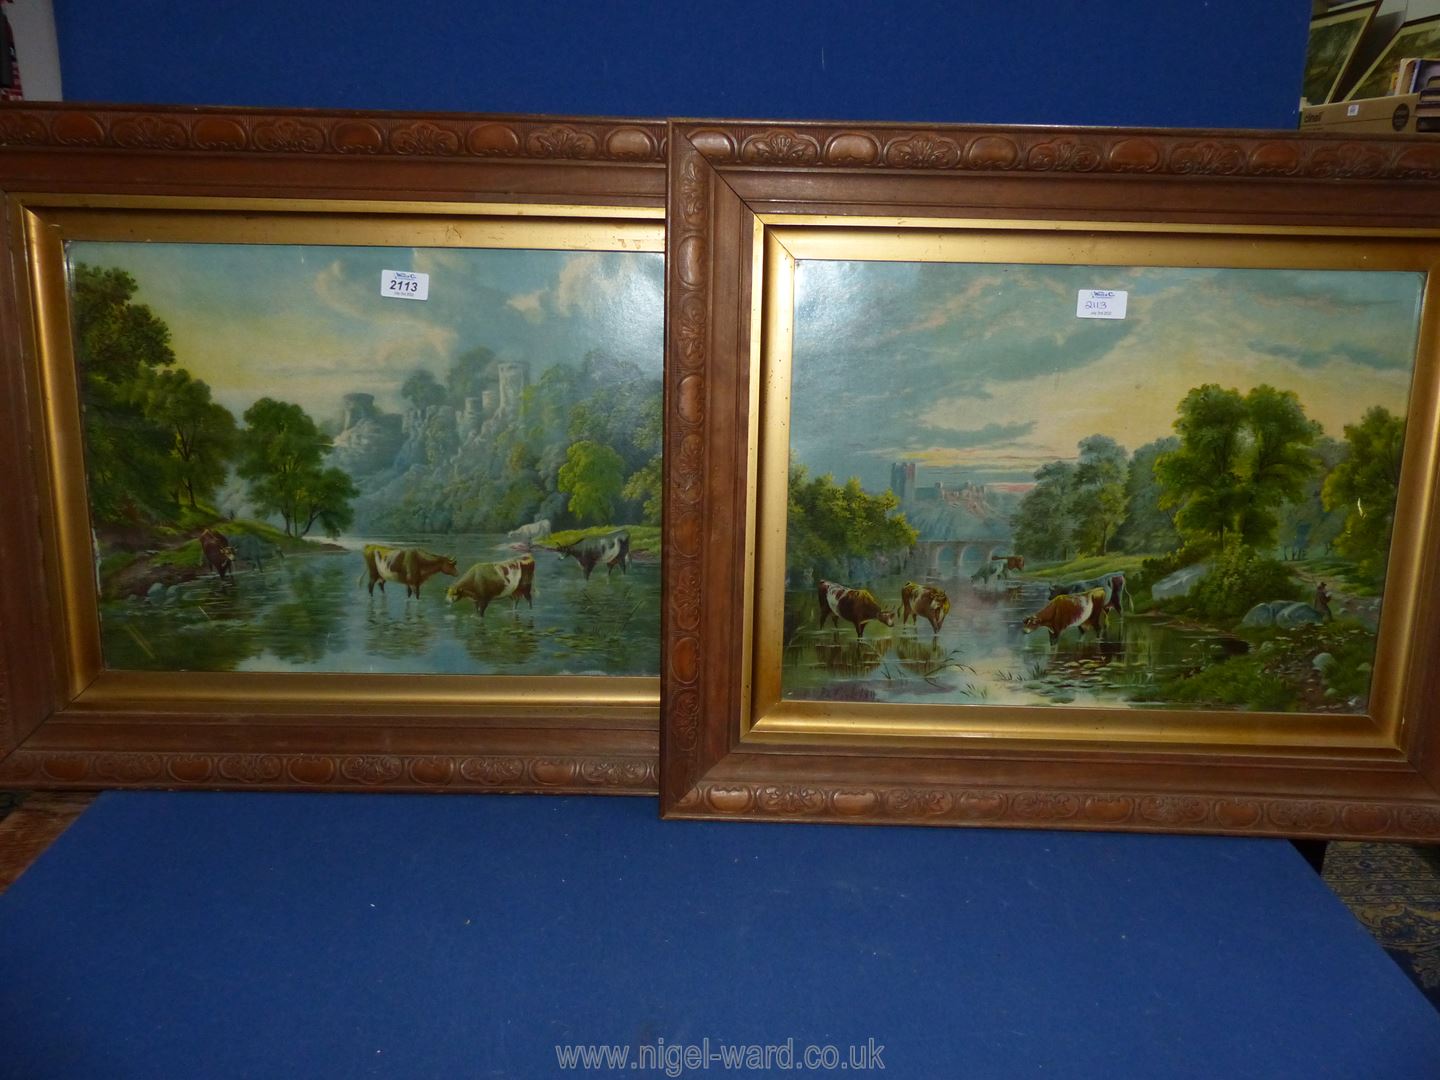 Two wooden framed Prints of cattle drinking in a river by B. Cook, dated 1889.